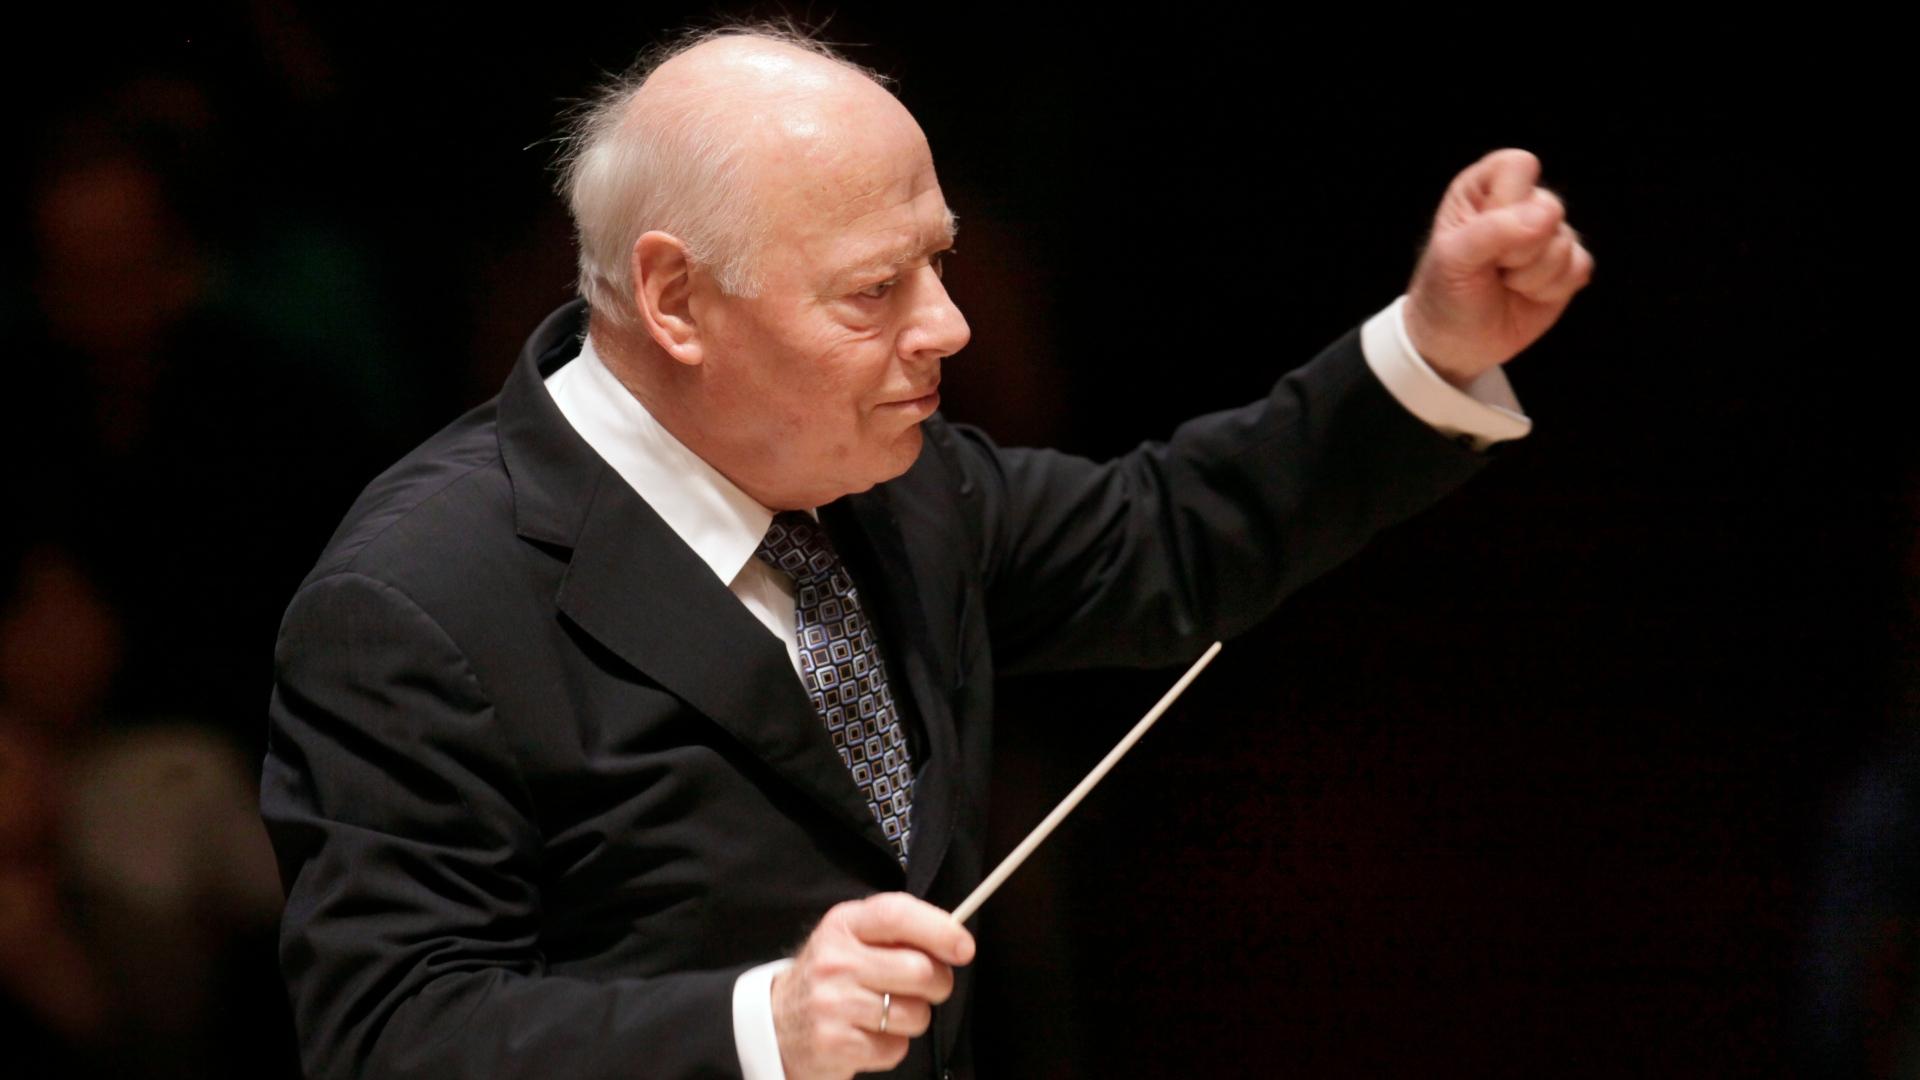 In this Friday, Nov. 20, 2009 file photo, Principal Conductor of the Chicago Symphony Orchestra Bernard Haitink conducts the Boston Symphony Orchestra in the Brahms Symphony No. One in Boston. (AP Photo / Steven Senne, File)